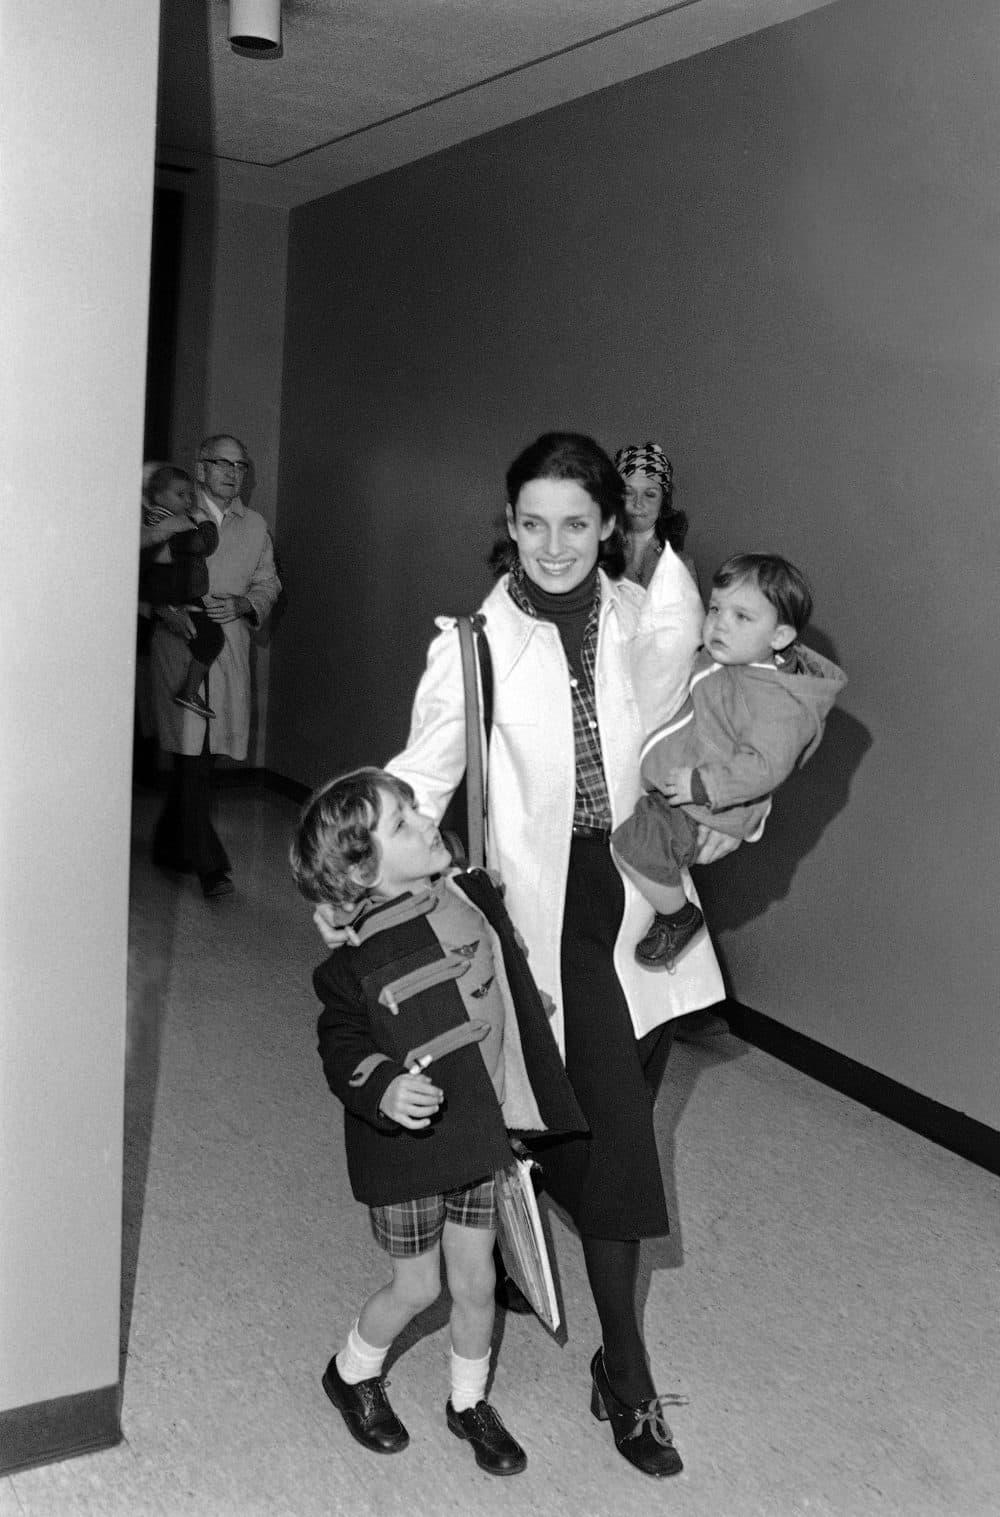 Trudeau arrives at Boston's Logan Airport carrying her son Michel and walking with her other son, Justin, April 11, 1977. (AP Photo)